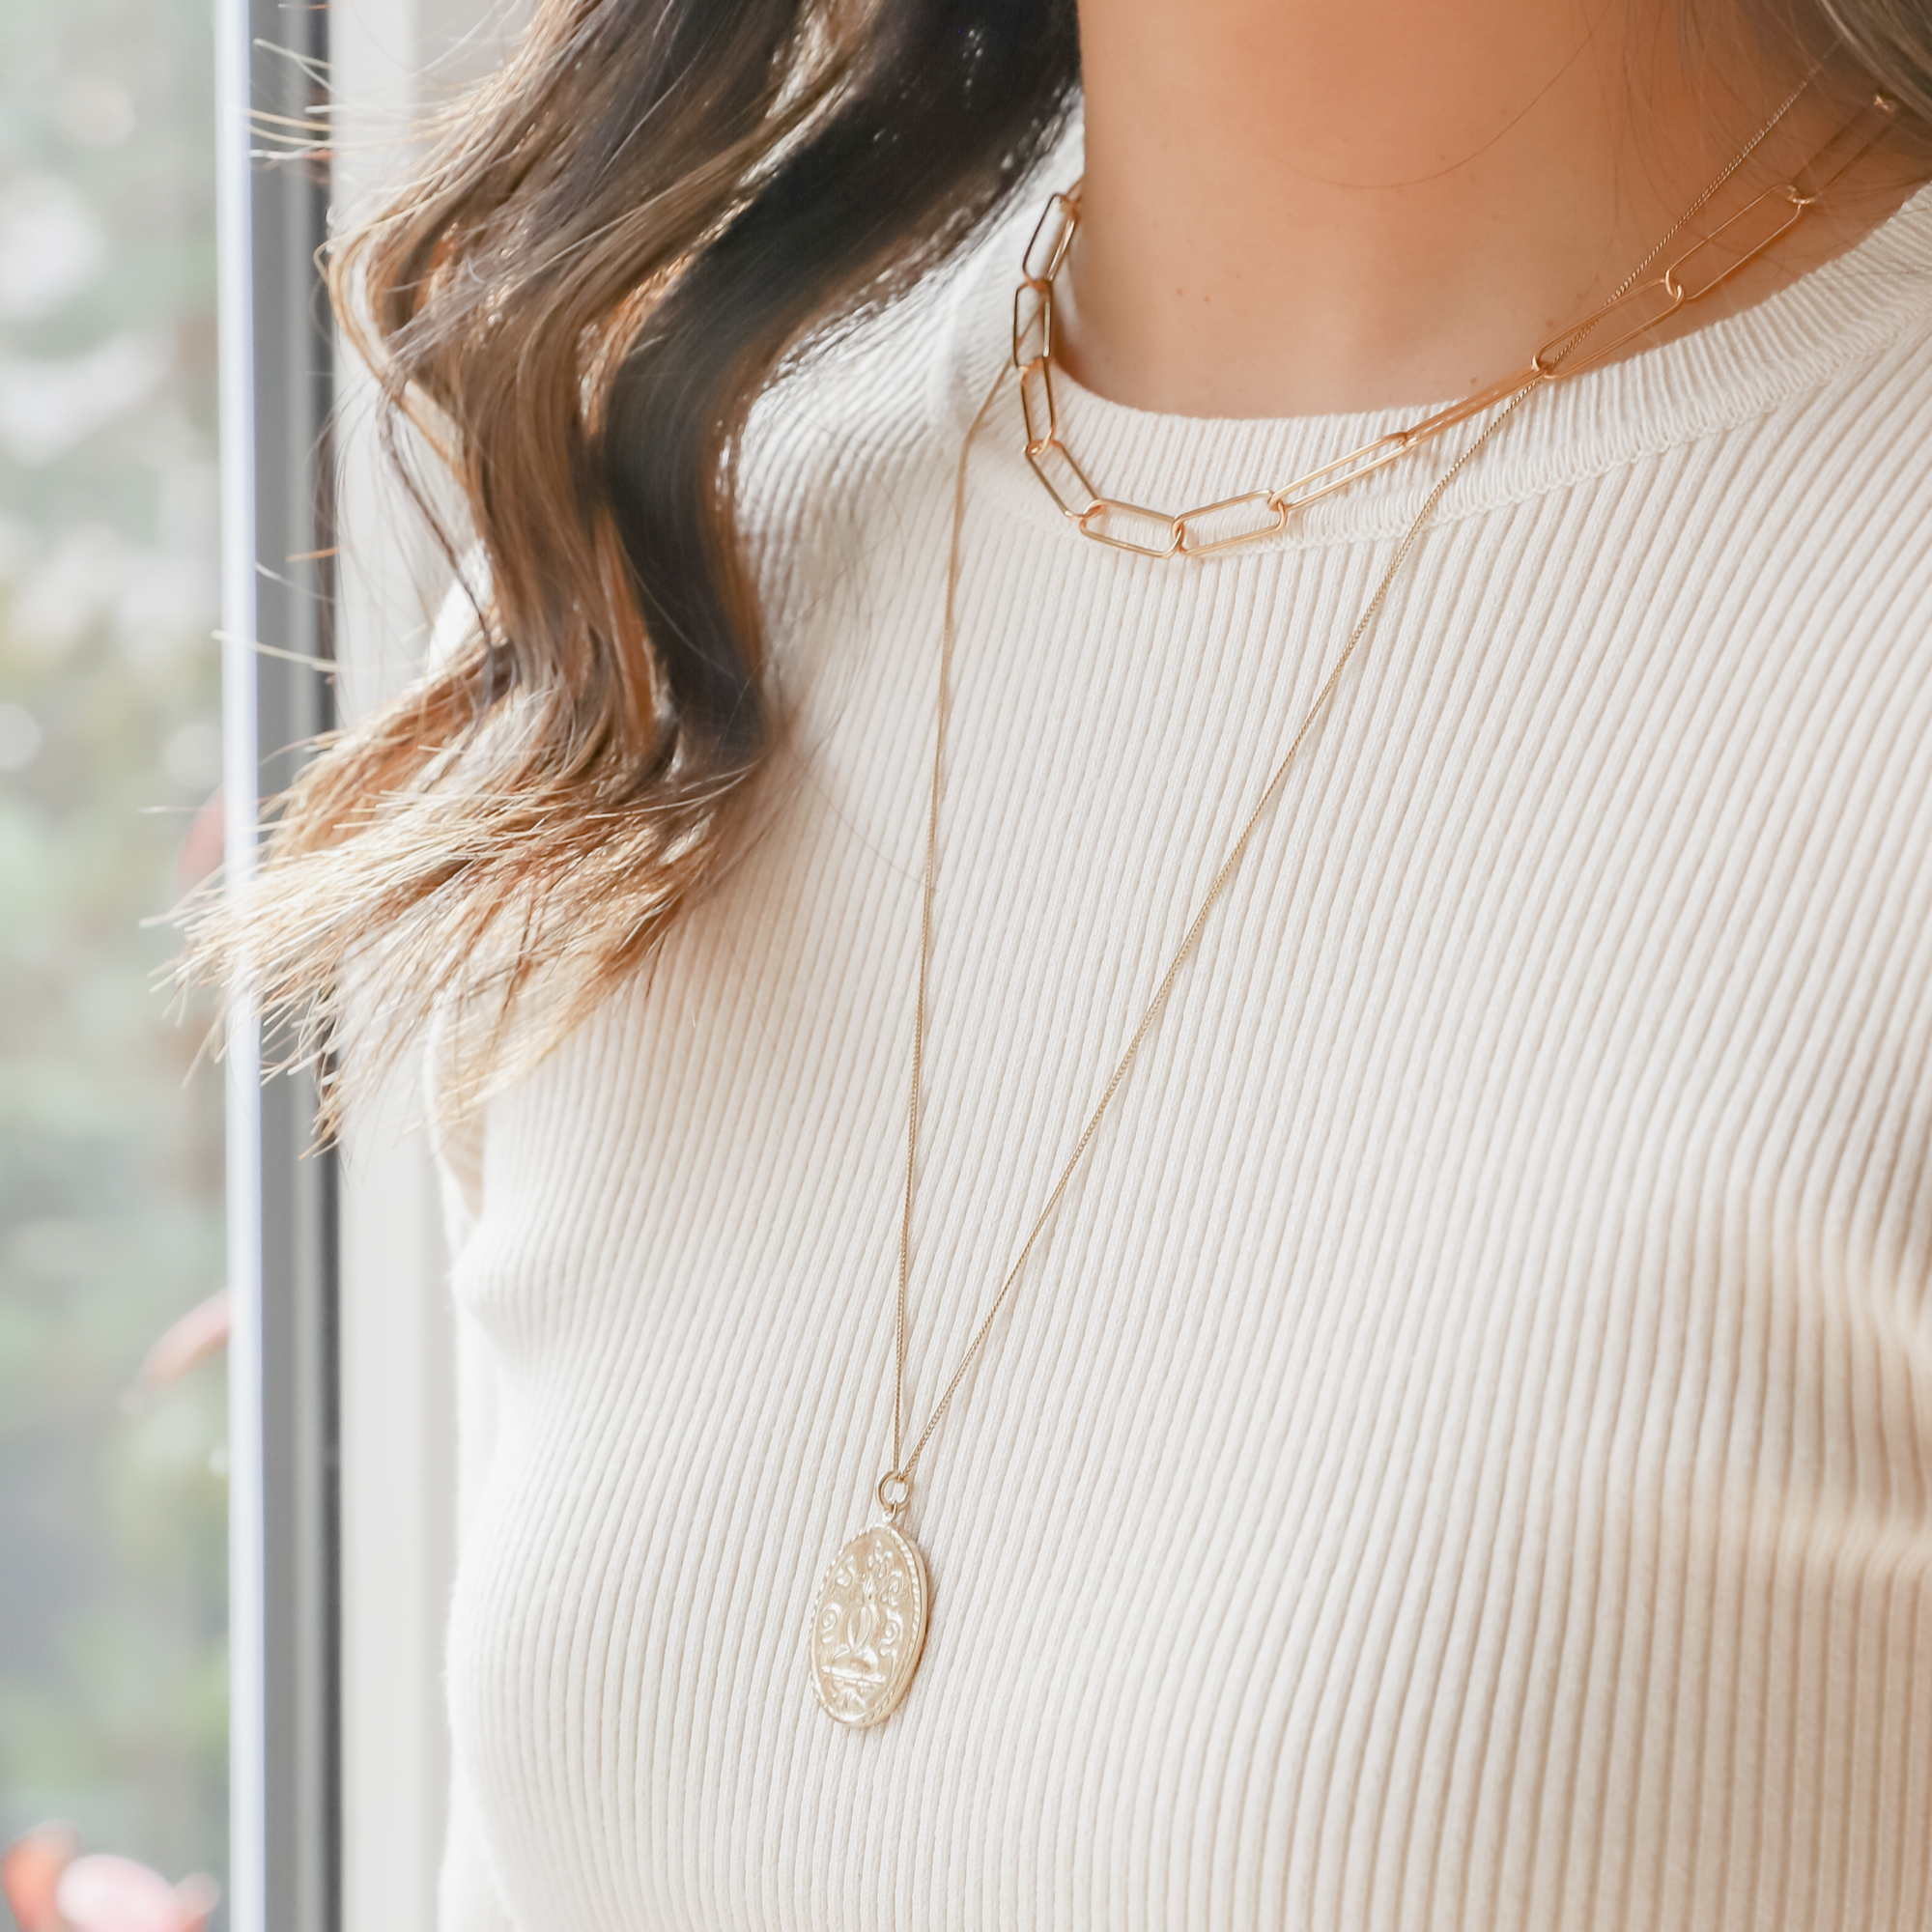 Simple, elegant, handmade fine paper clip chain necklace in 22K gold vermeil is 14.5" with 2" extender; features lobster clasp and hand-pressed Jai Style charm. Makes a bold style statement on its own and is perfect for layering.